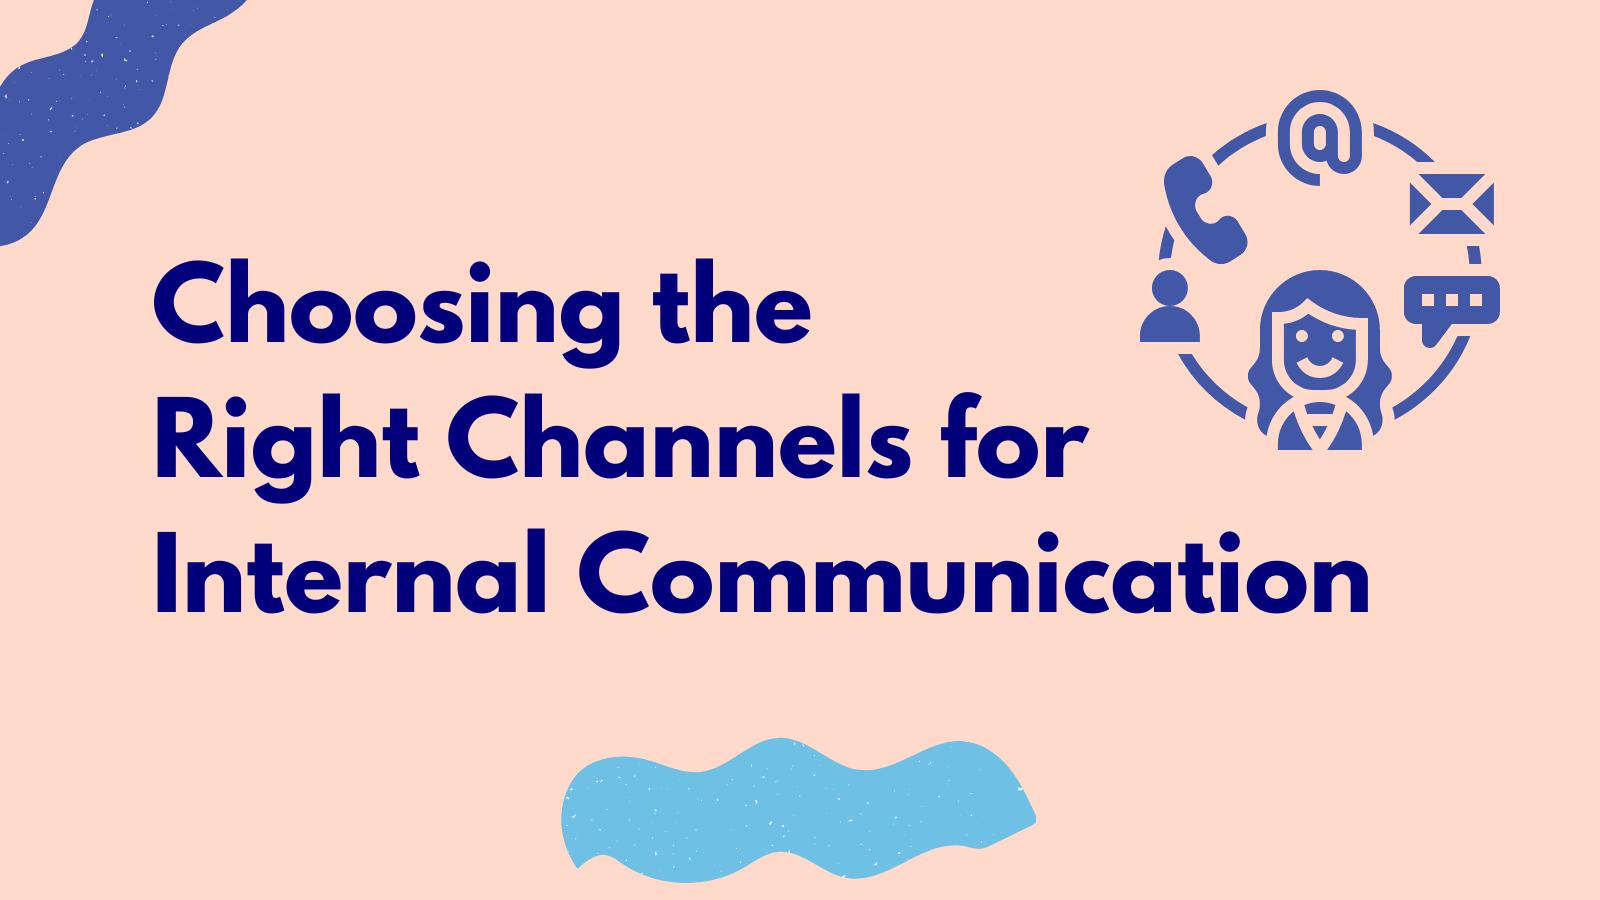 Choosing the Right Channels for Internal Communication